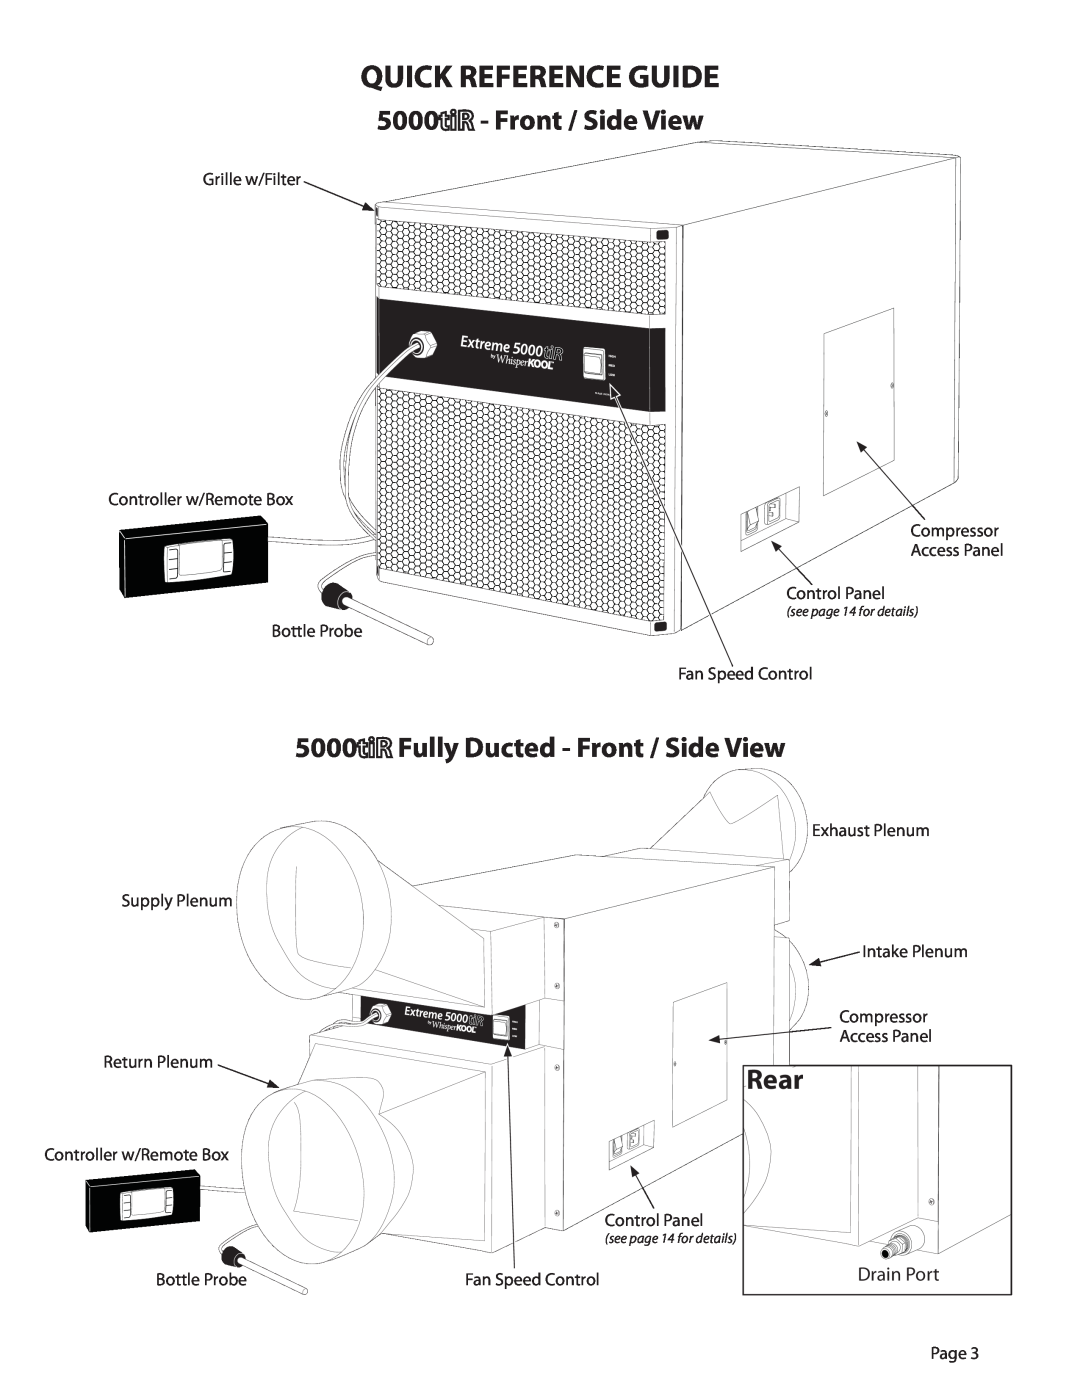 WhisperKool 5000 owner manual Fully Ducted - Front / Side View, Rear, Quick Reference Guide, Drain Port 